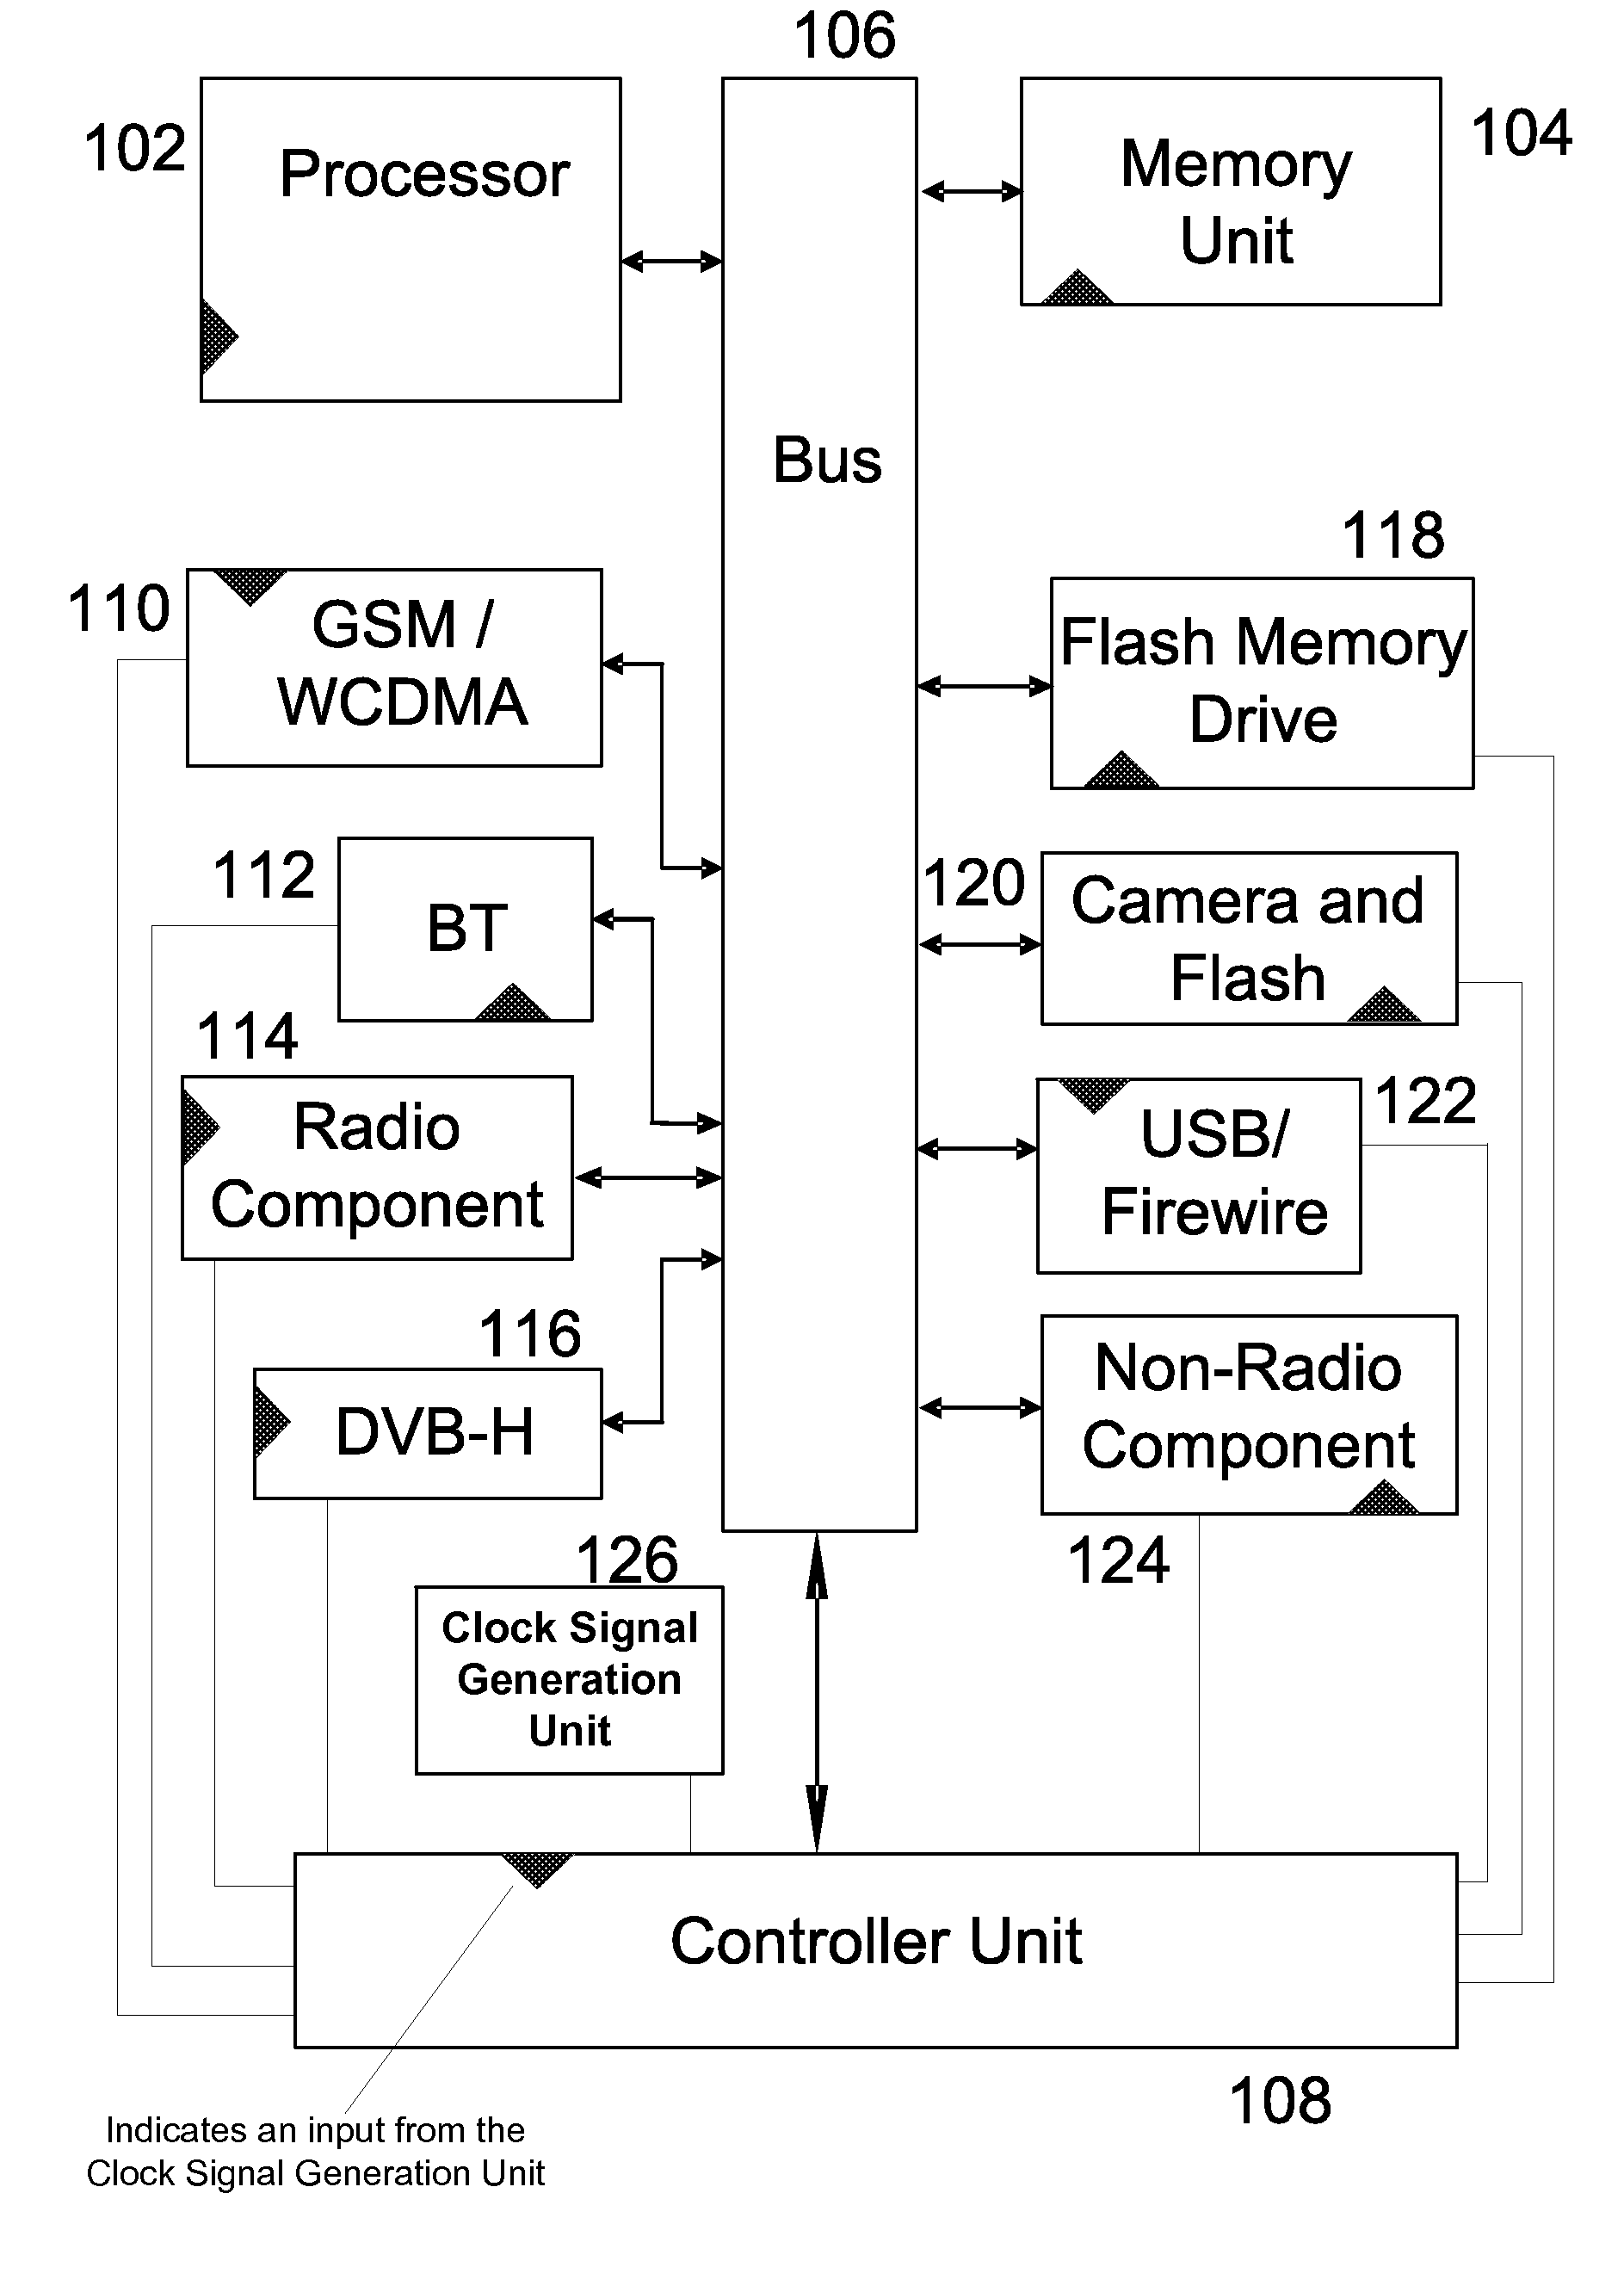 System scheduler for mobile terminals